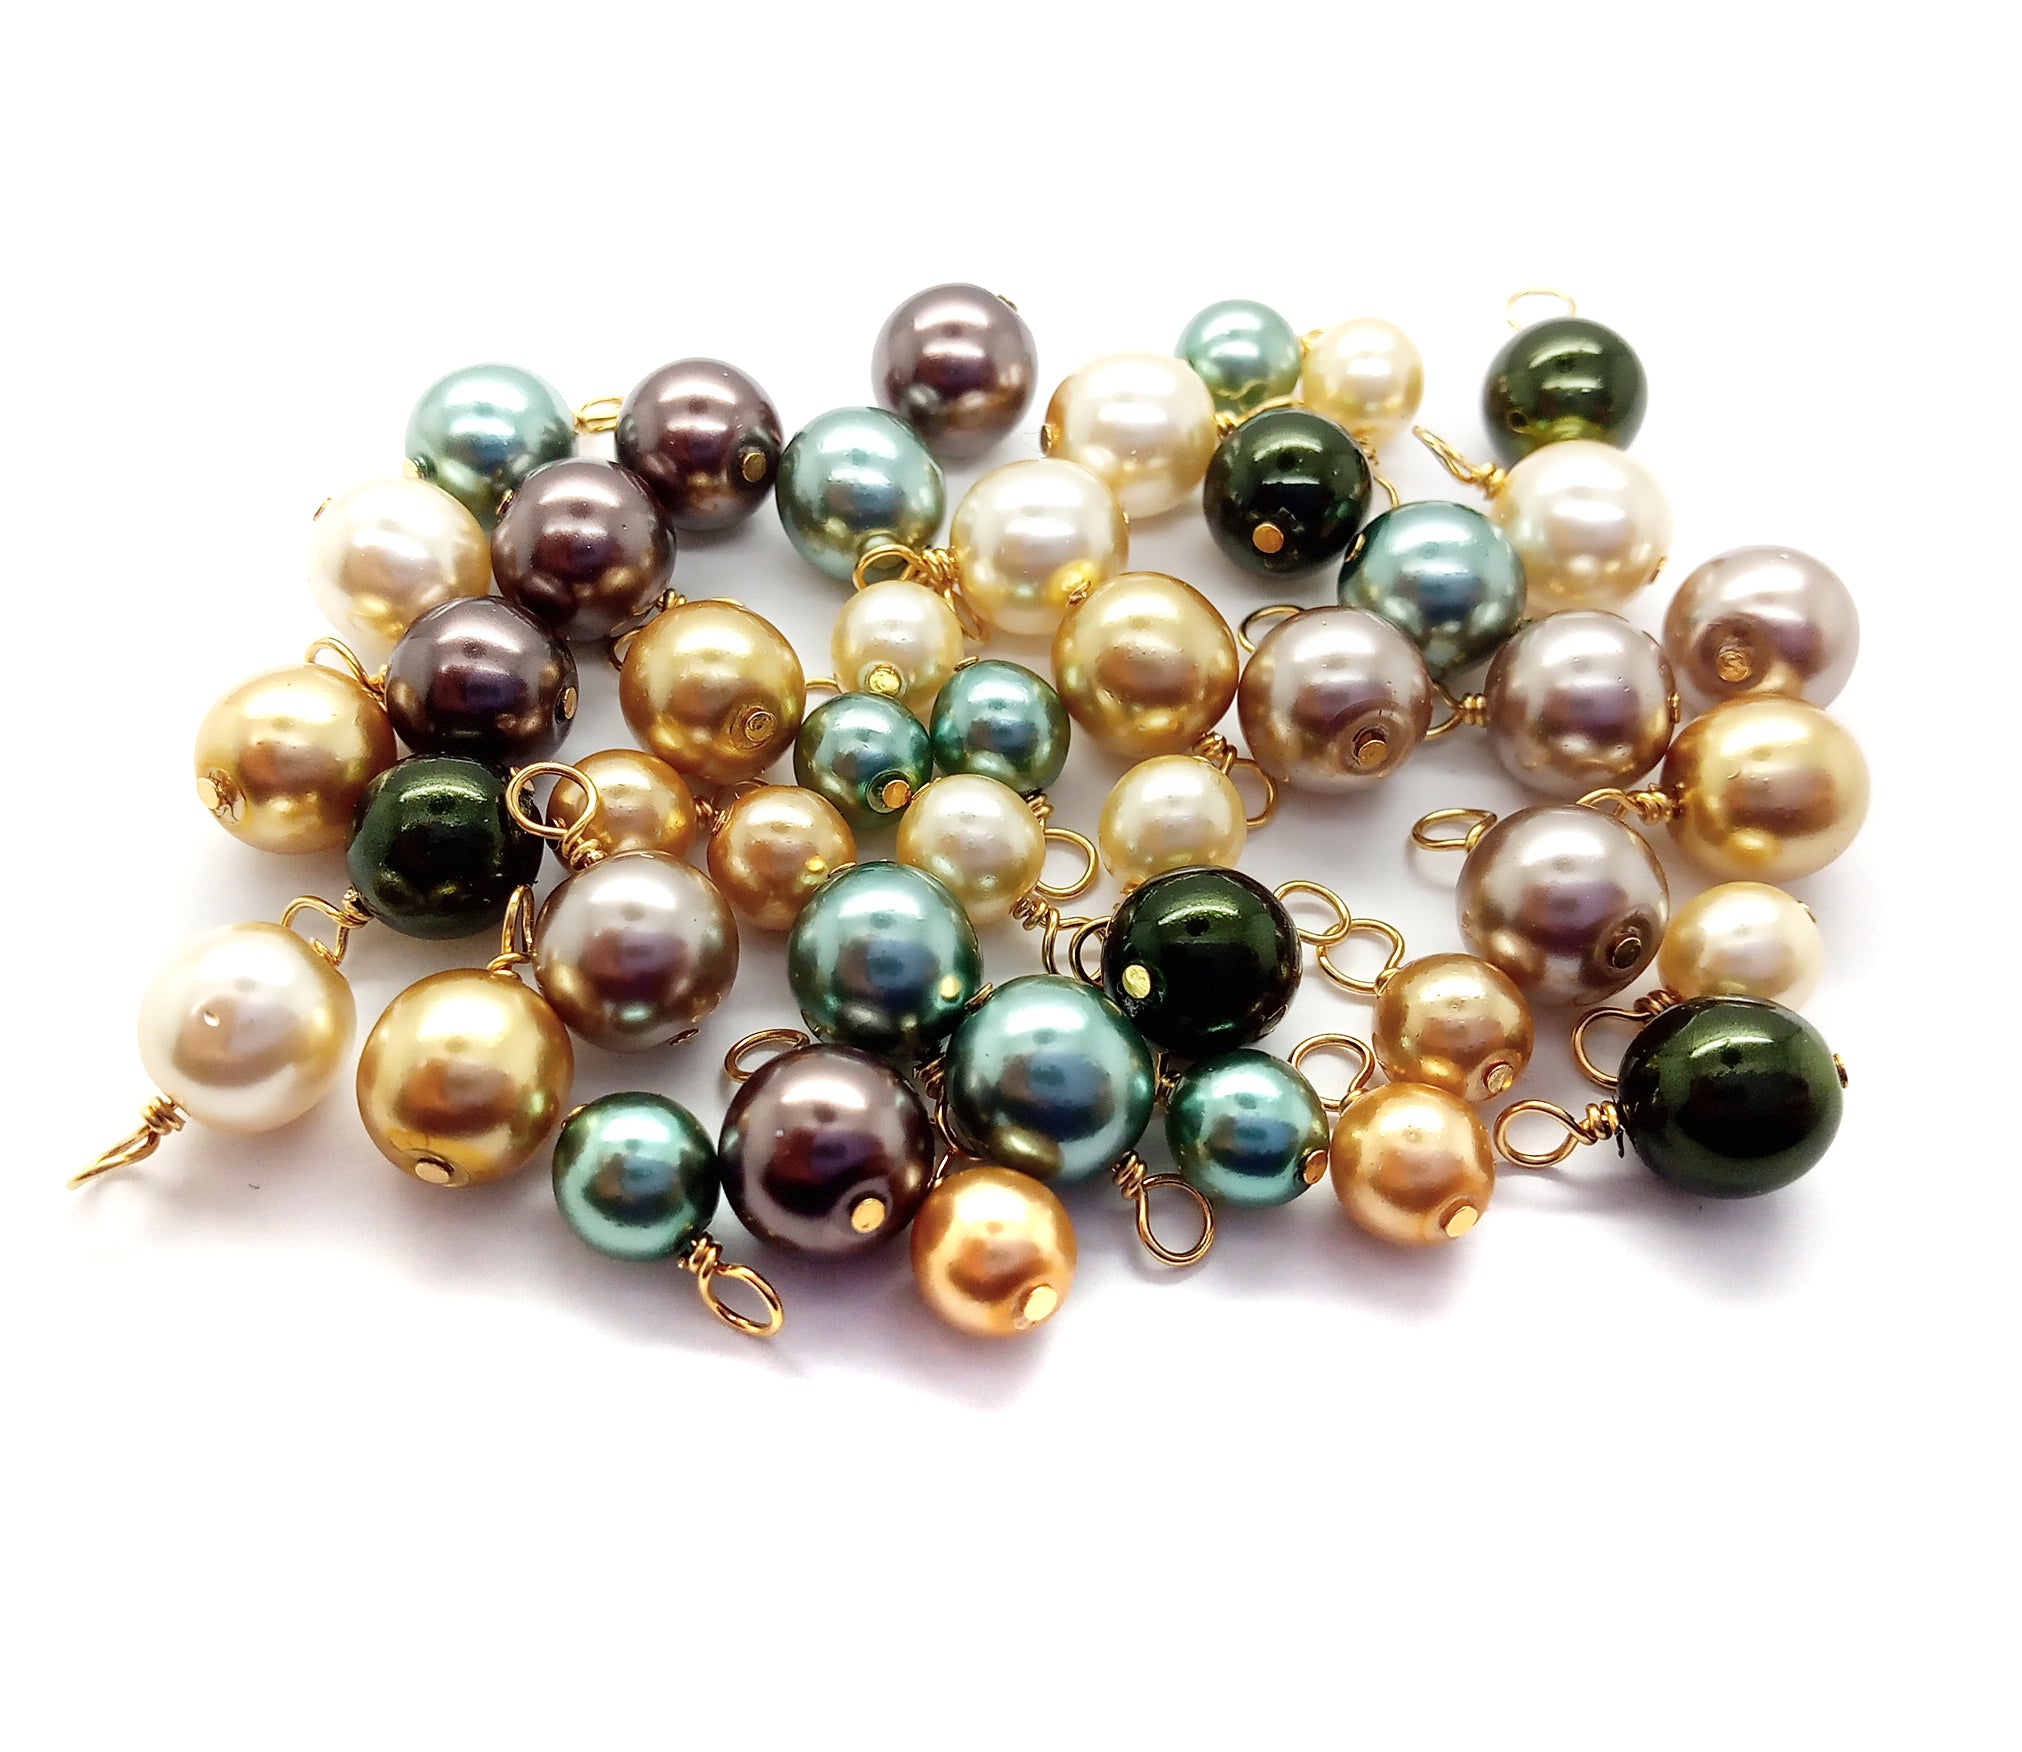 Bead Dangle Mix in Fall Colors, 20 pc Brown & Green Glass Pearls, Gold-Plated Wire, Adorabilities